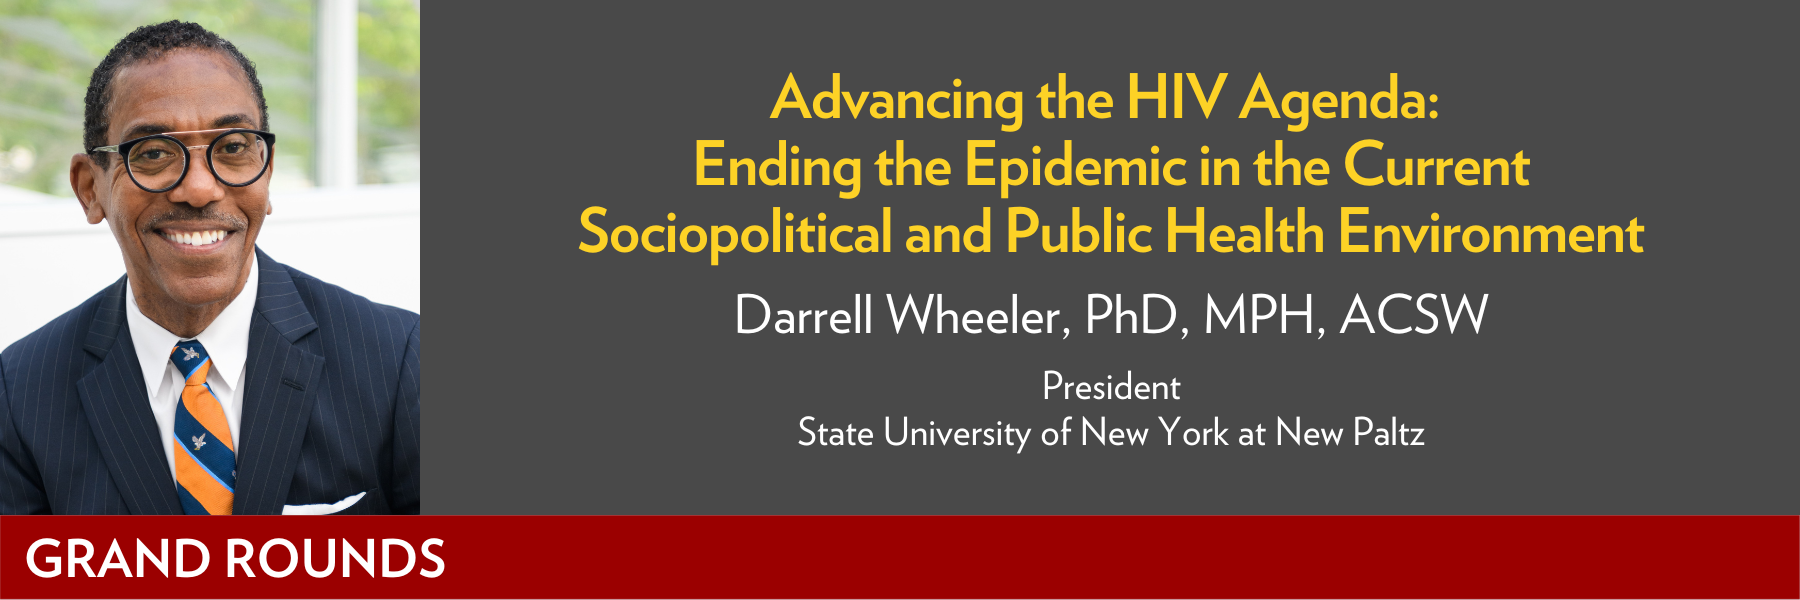 Advancing the HIV Agenda: Ending the Epidemic in the Current Sociopolitical and Public Health Environment